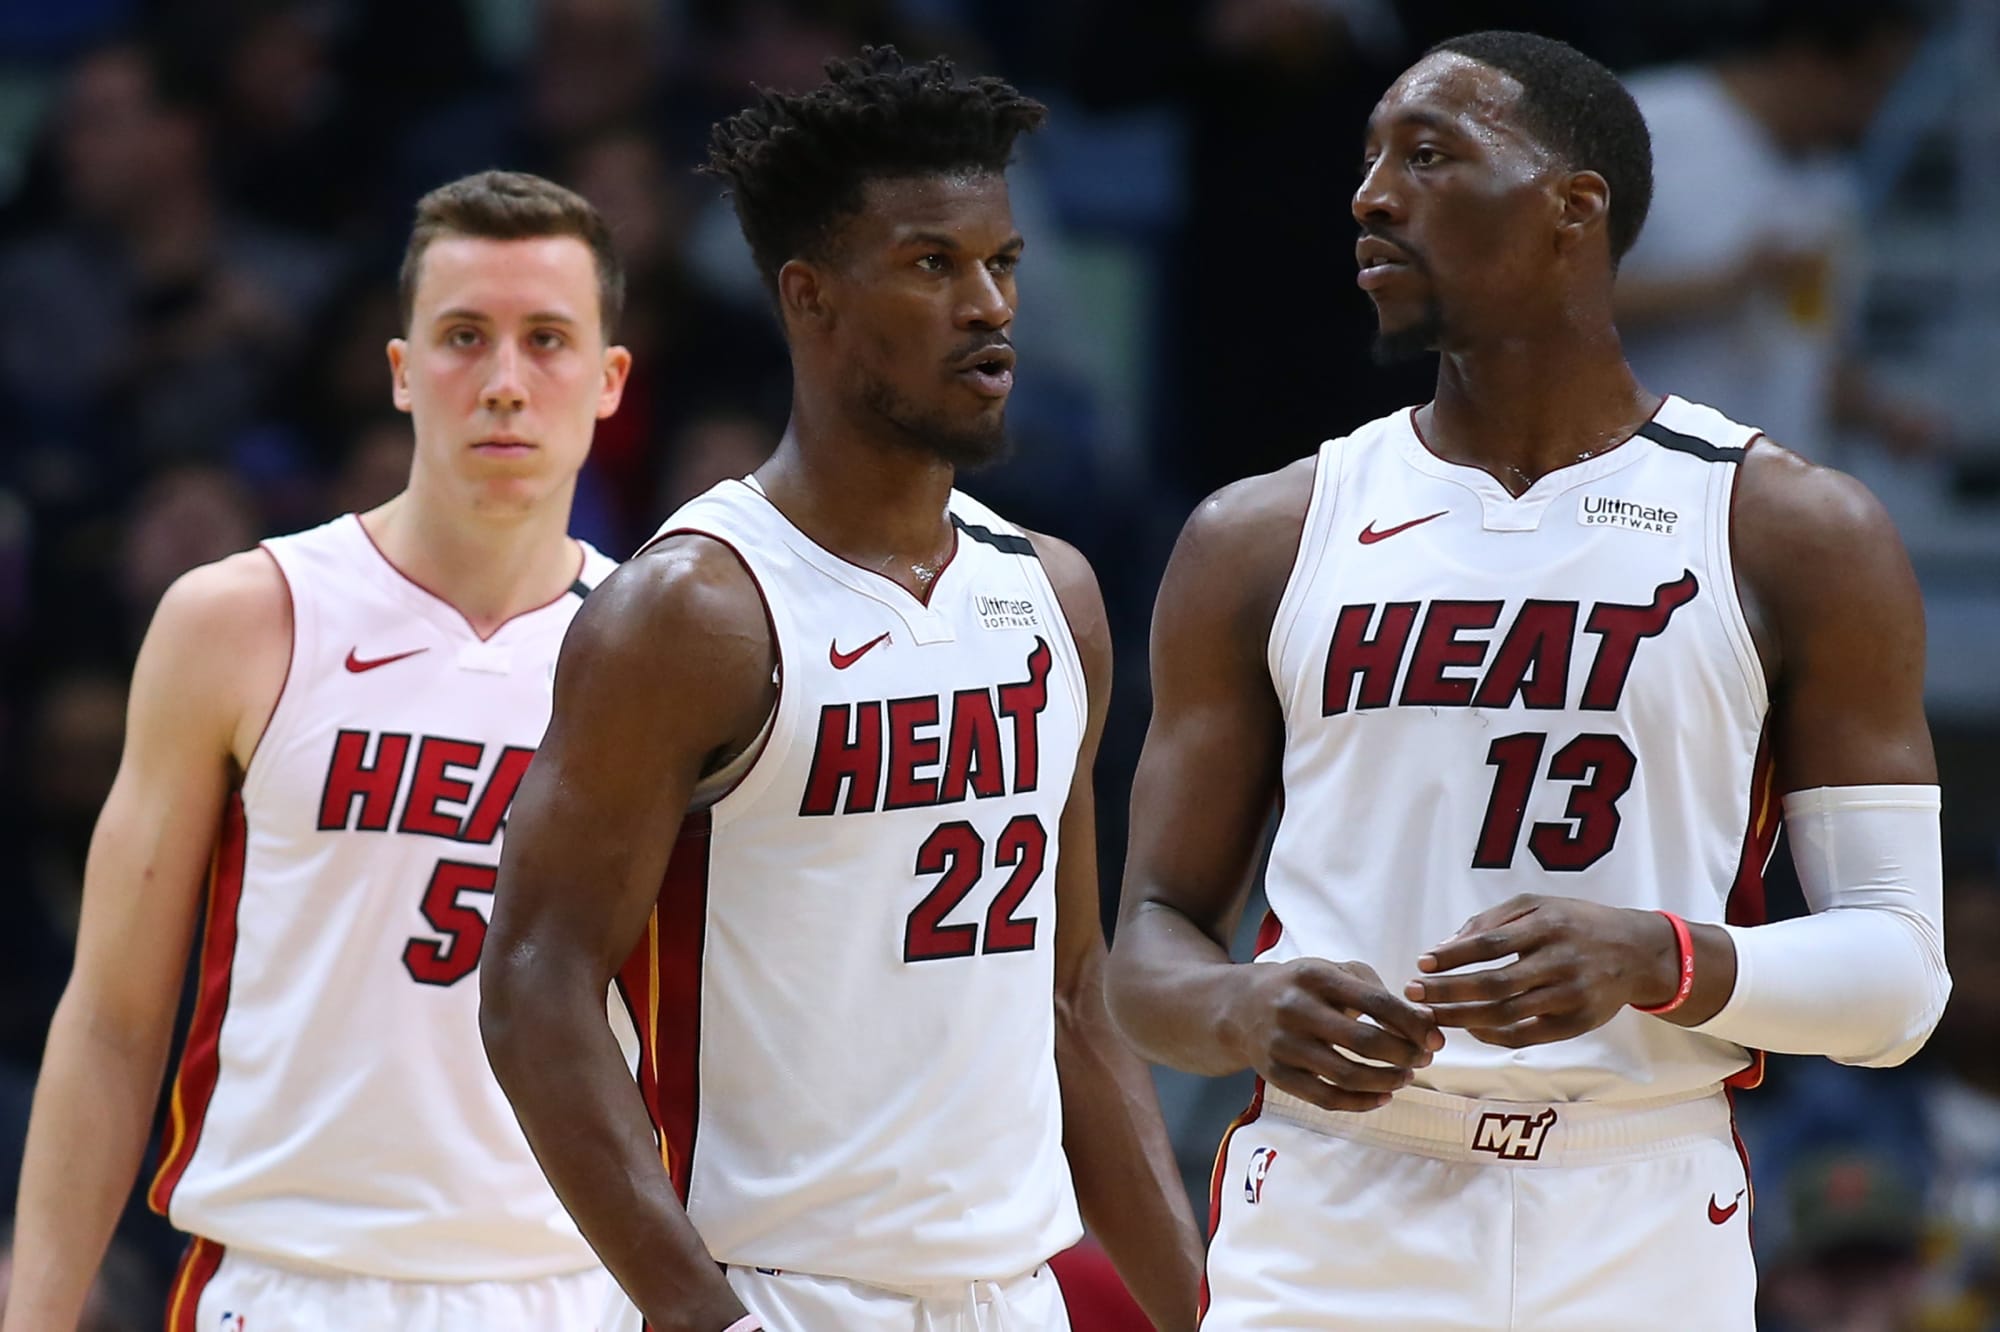 NBA: All-Time Starting 5 of the Miami Heat